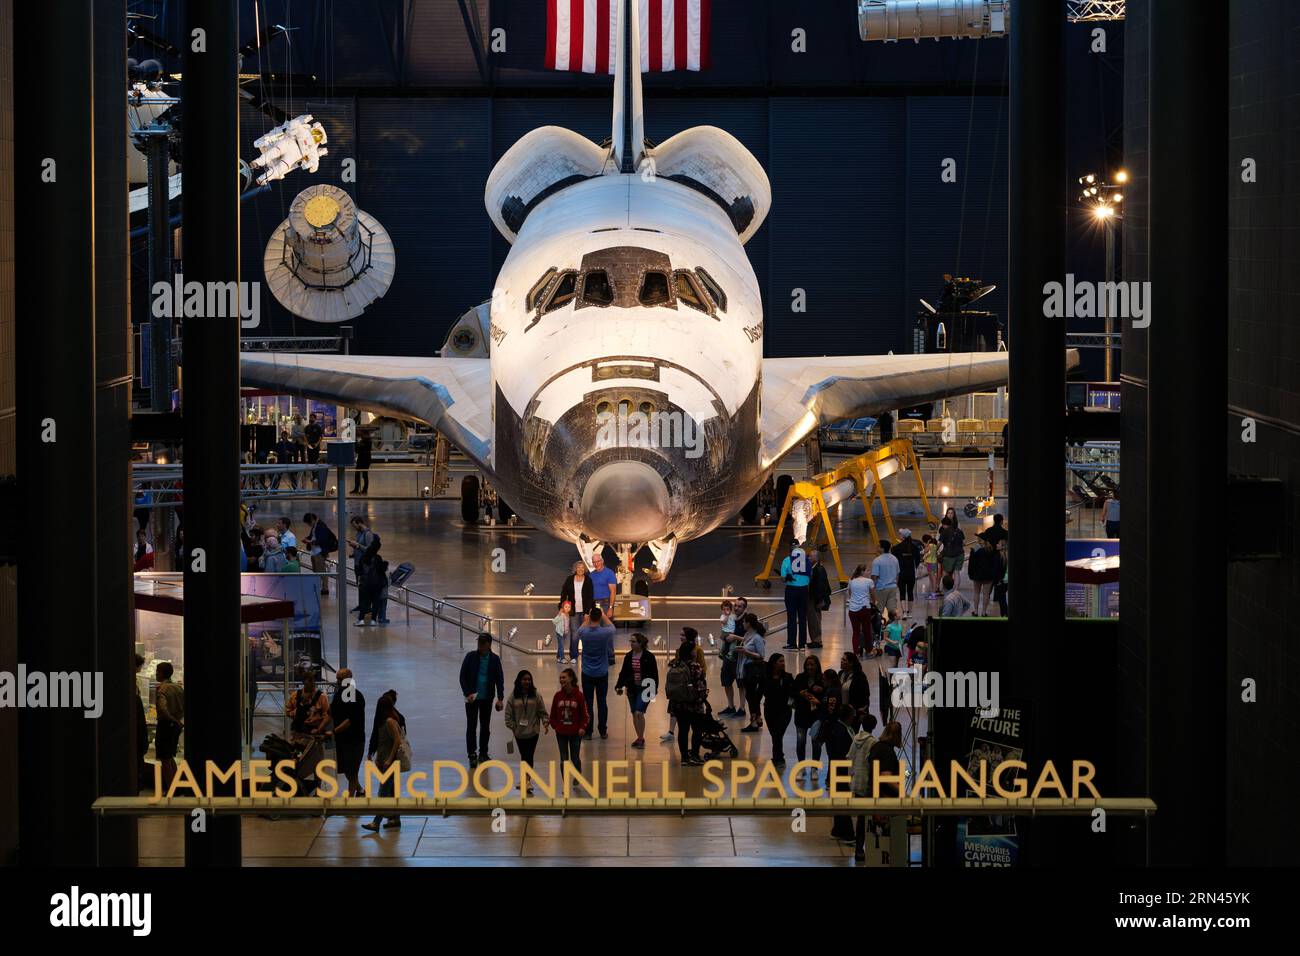 CHANTILLY, Virginia, United States — The Space Shuttle Discovery stands prominently on display at the Udvar-Hazy Center, an annex of the Smithsonian National Air and Space Museum. As one of NASA's flagship shuttles, Discovery completed 39 missions over 27 years before its retirement. Stock Photo